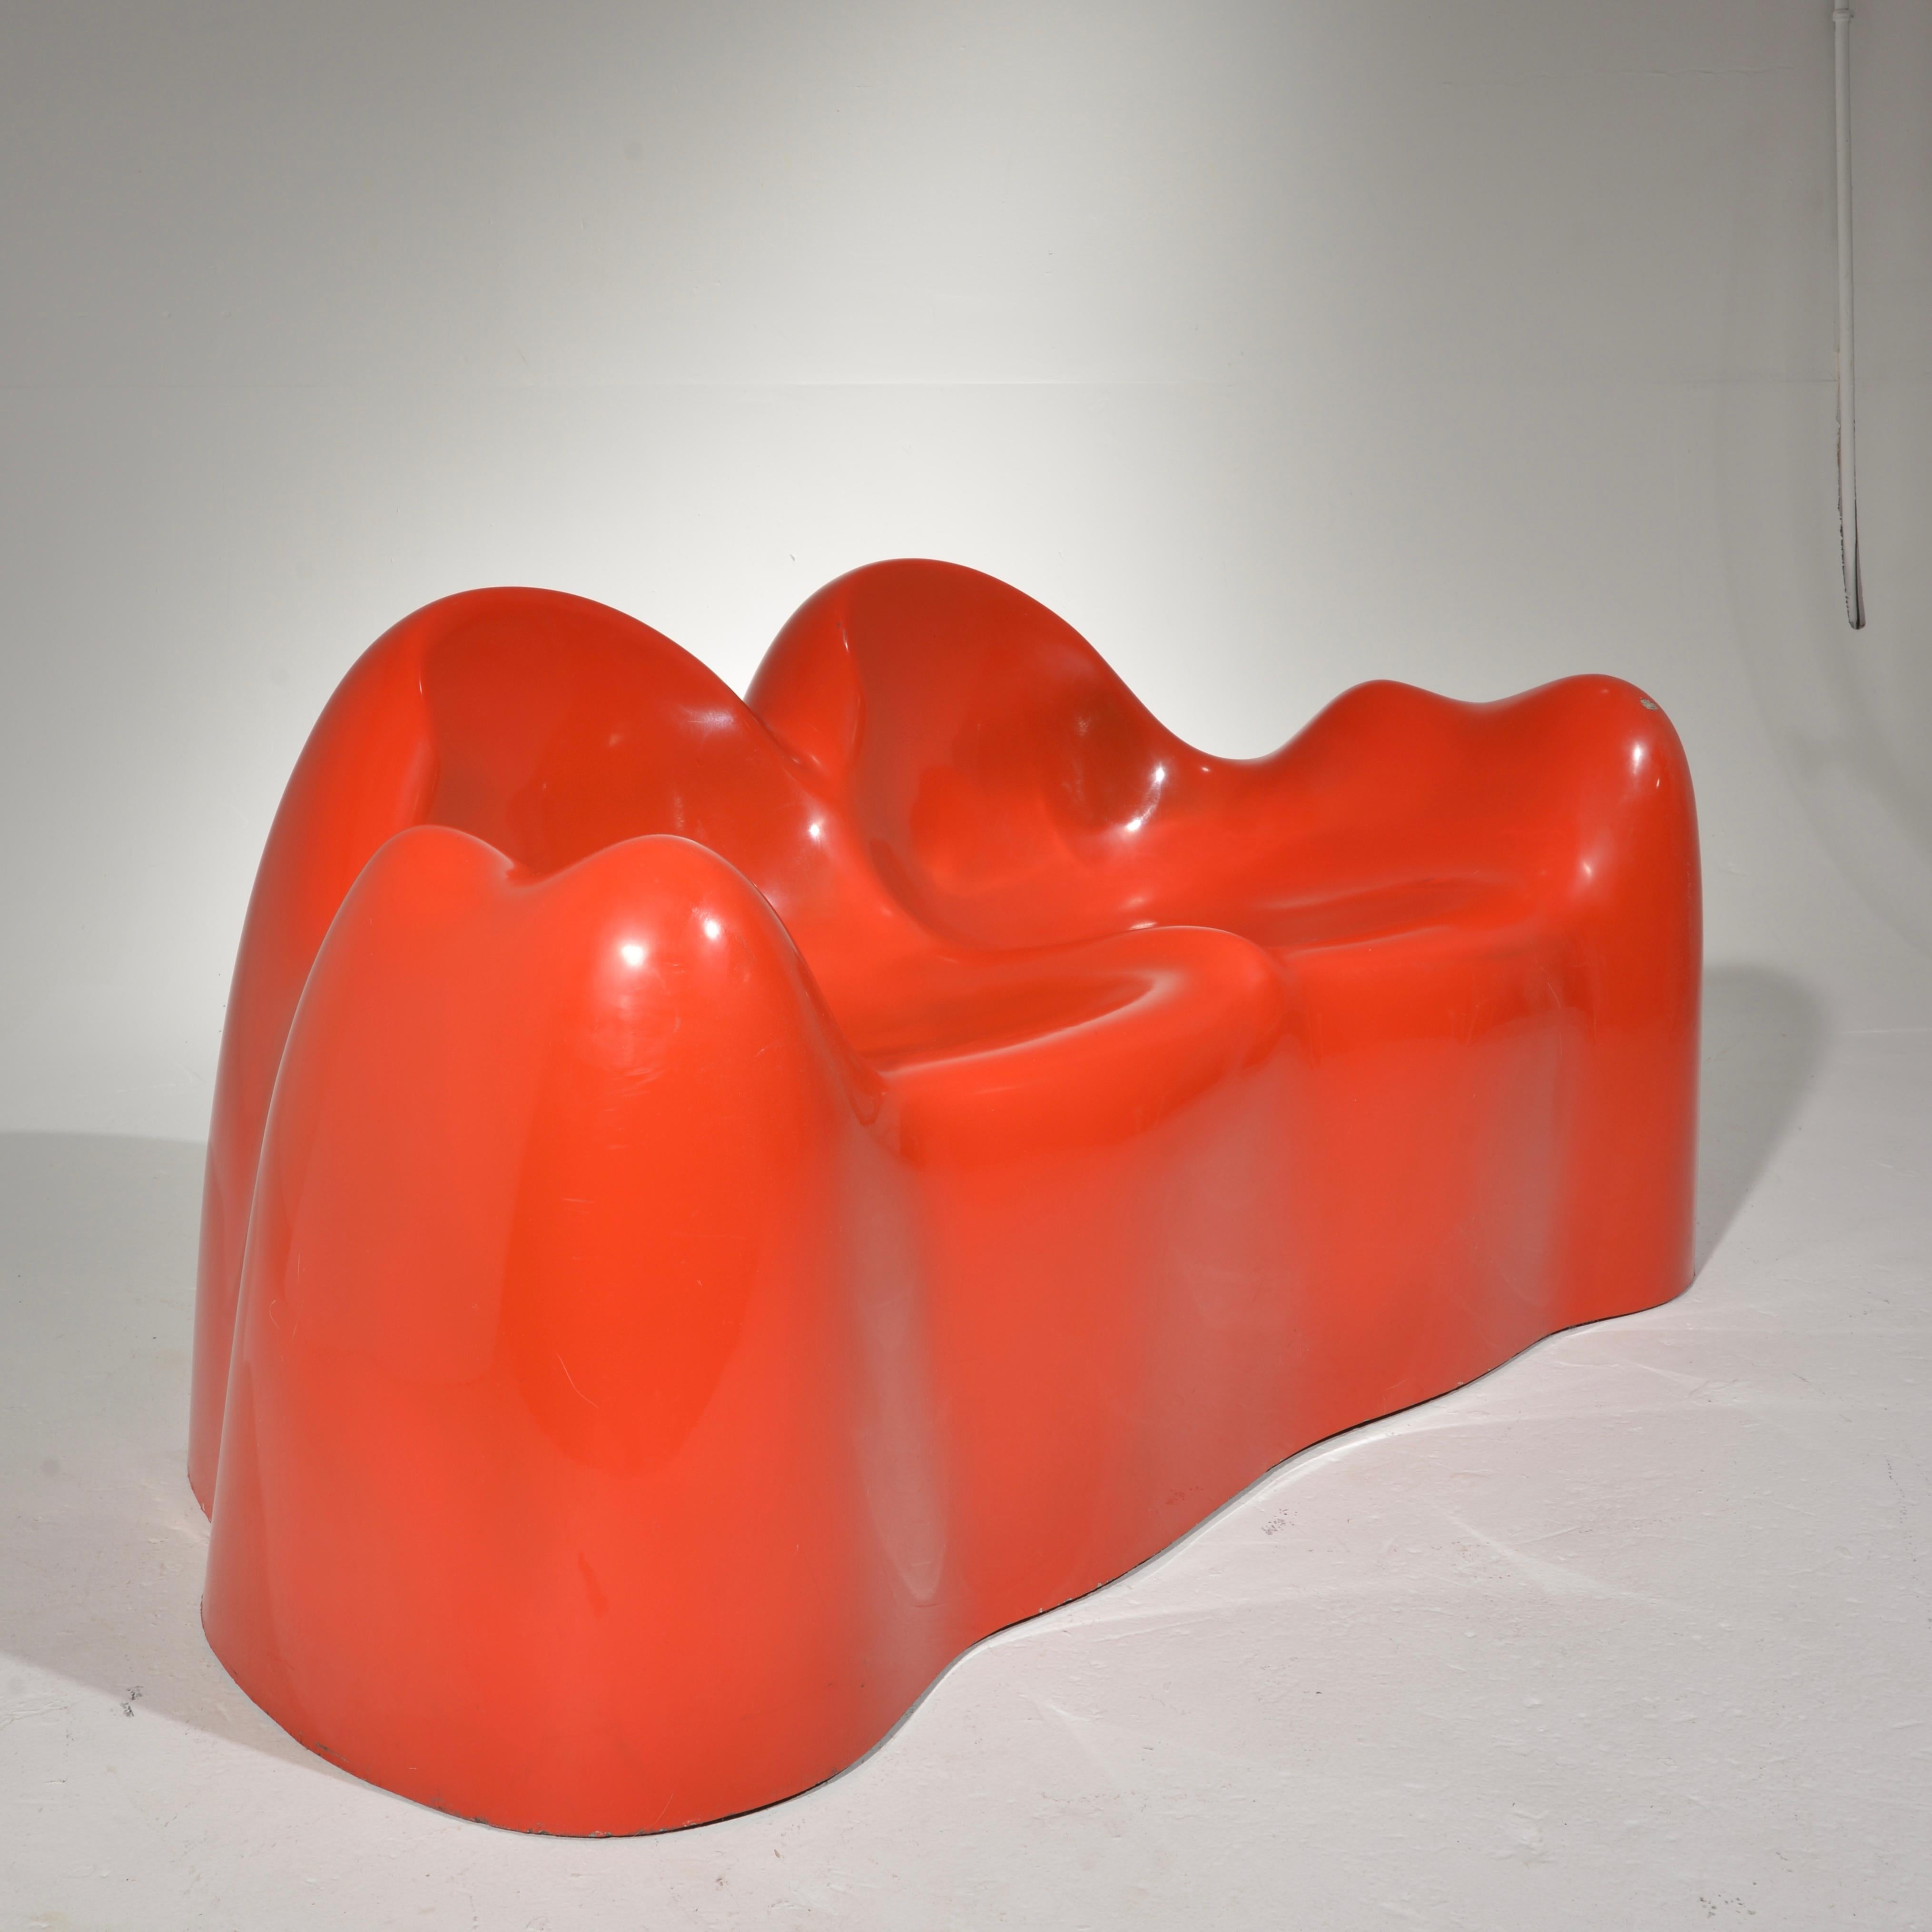 American Molar Settee by Wendell Castle For Sale